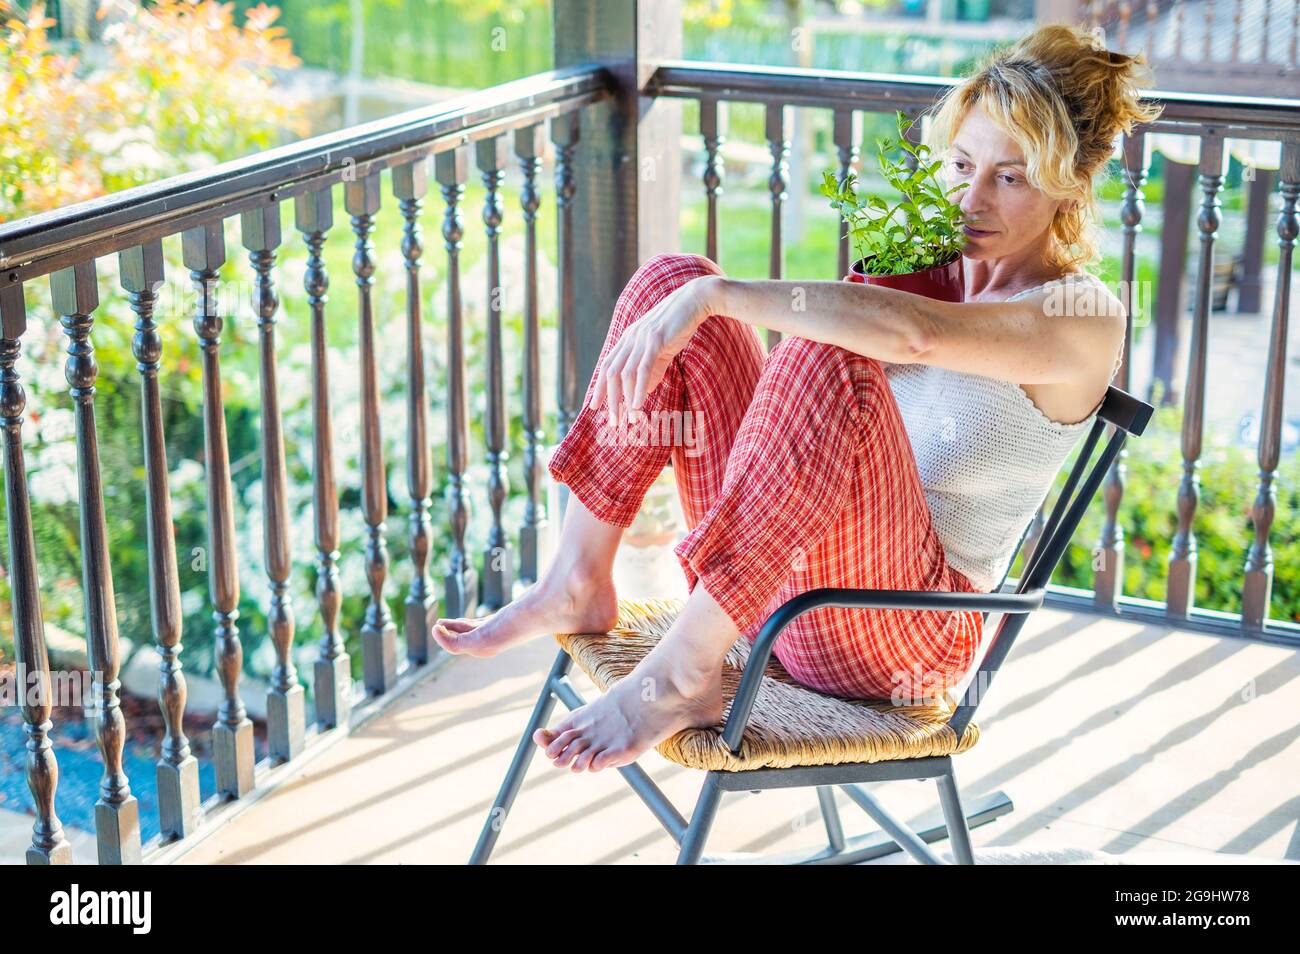 portrait of a young mature caucasian blonde woman relaxing at home on the porch sitting in a rocking chair with a potted plant. Lifestyle concept. Stock Photo